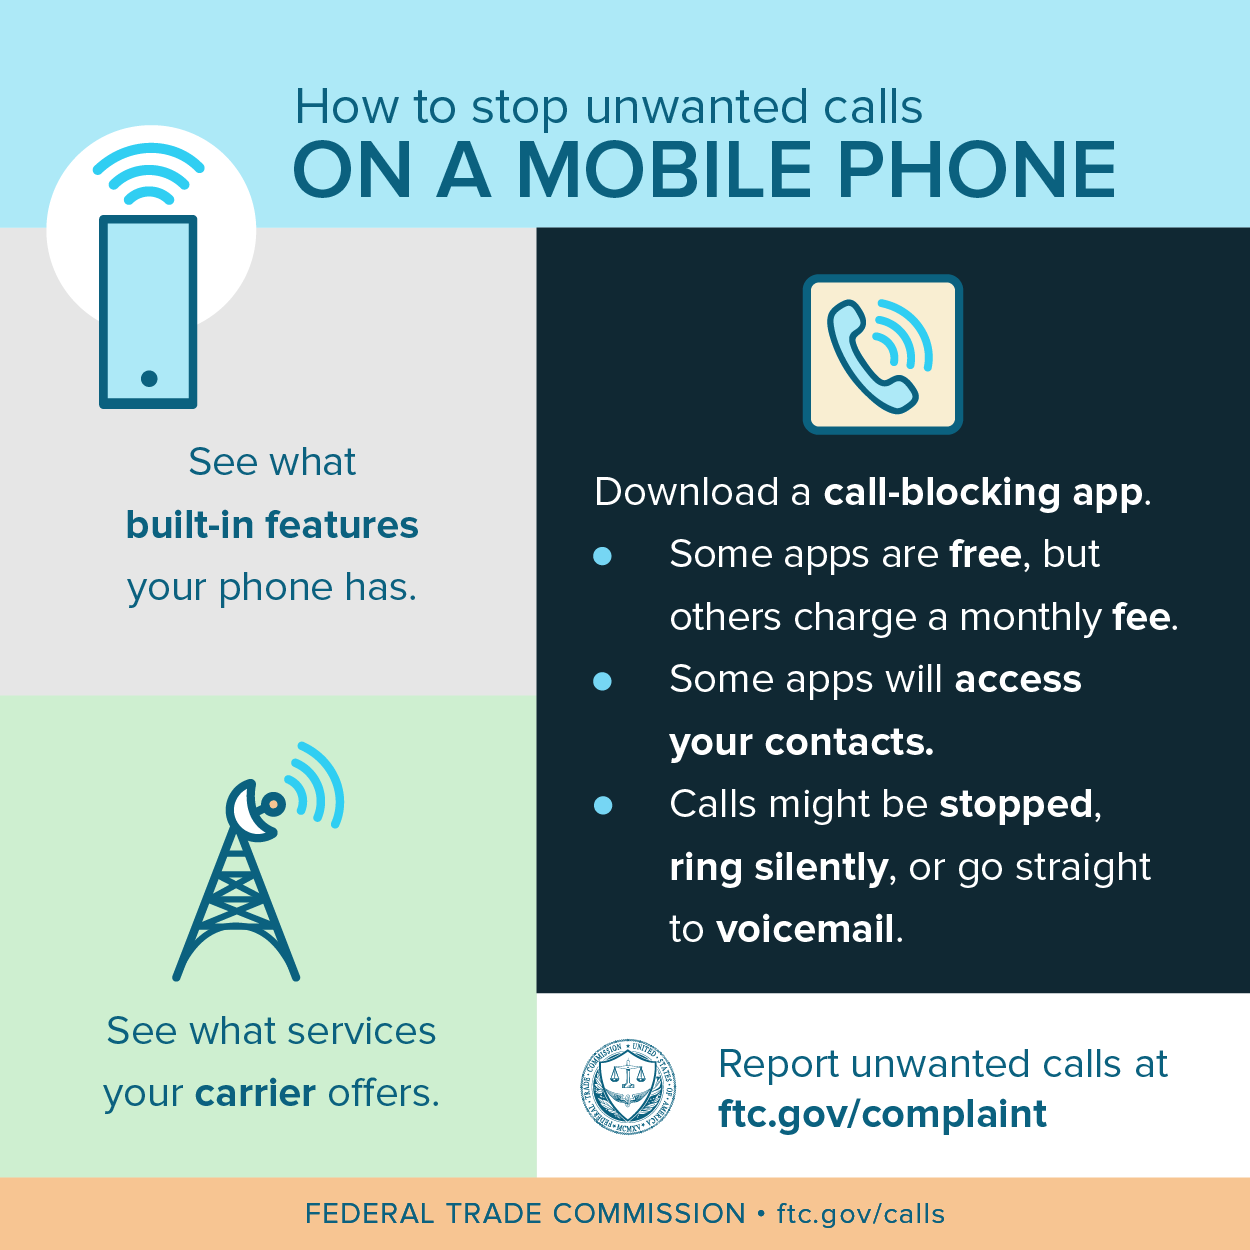 Graphic of how to stop unwanted calls on a mobile phone